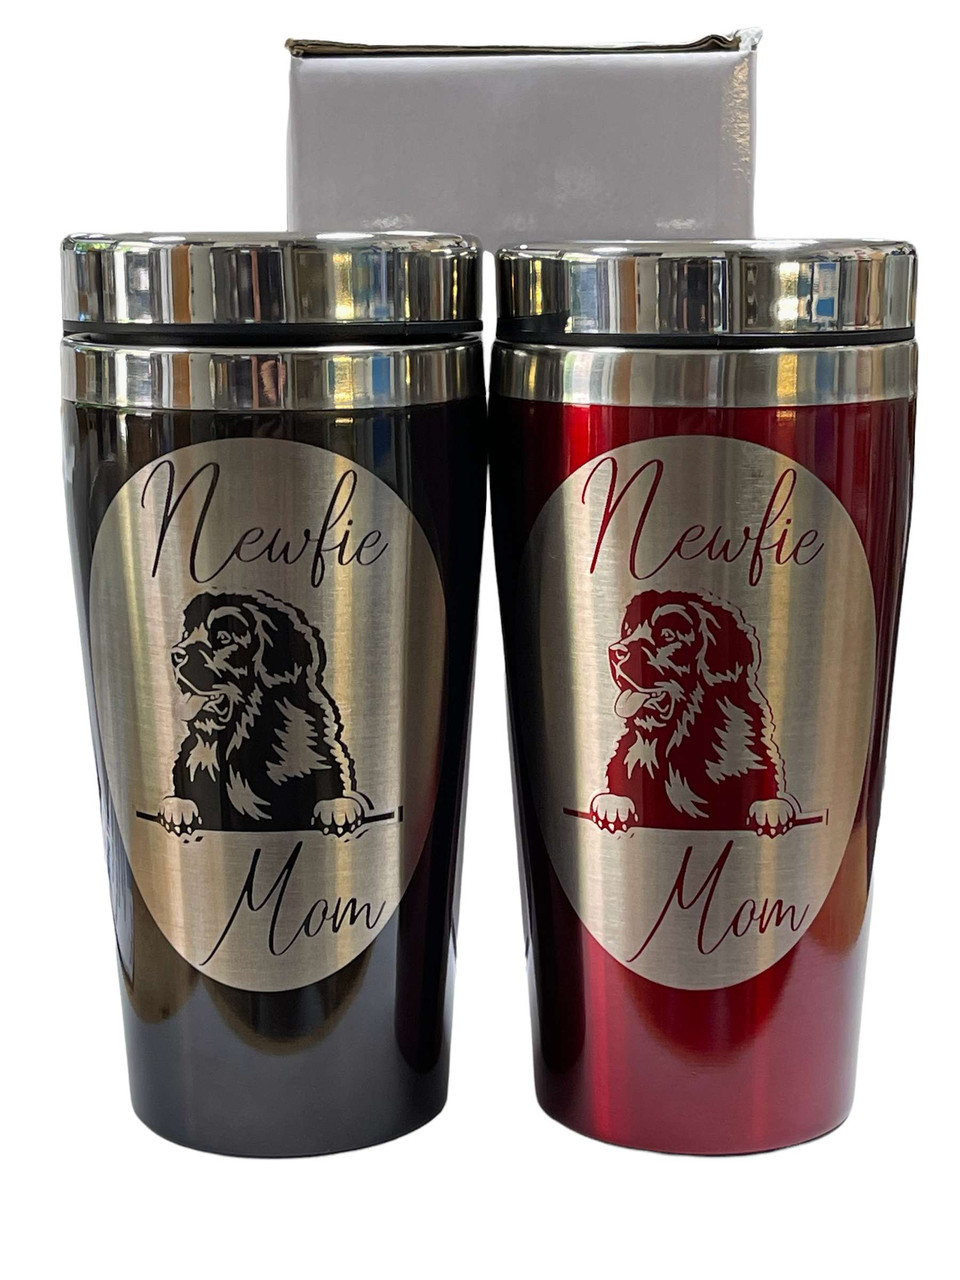 https://cdn11.bigcommerce.com/s-gu5hxc0z64/images/stencil/1280x1280/products/3662/6748/Newfie-Mom-Stainless-Steel-Cup_6747__12839.1658027443.jpg?c=1